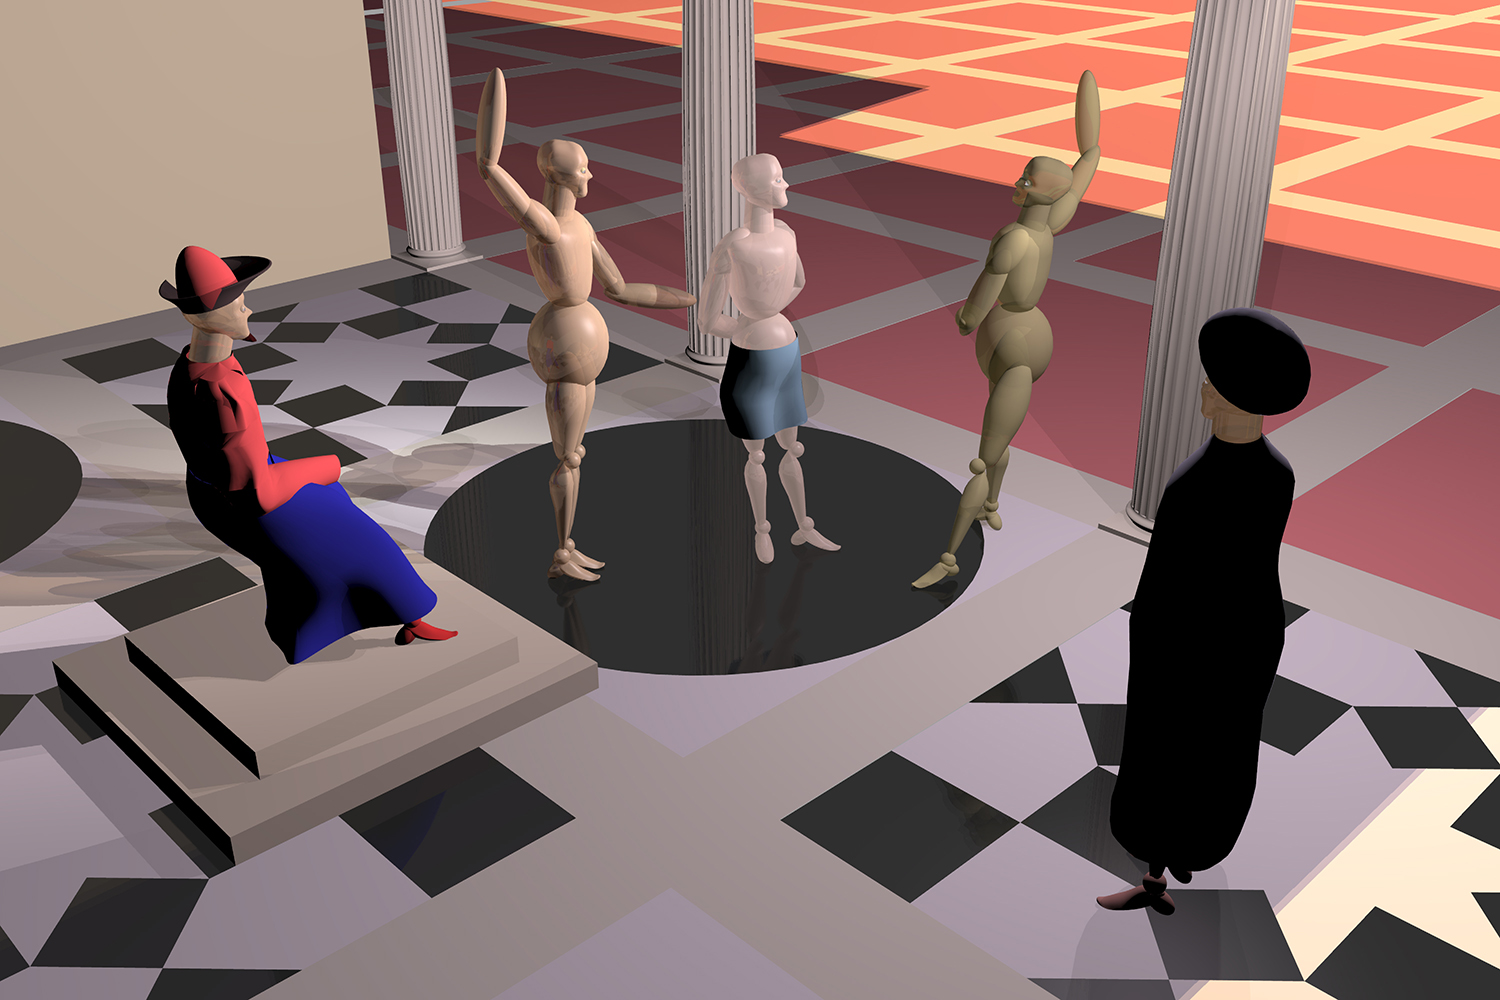   Flagellation, 2010, three dimensional computer model of Piero della Francesca's The Flagellation of Christ. An older version of this project was exhibited in Simulations, solo show curated by Tyna Harber Caldarone, Holden Street Gallery, Providence